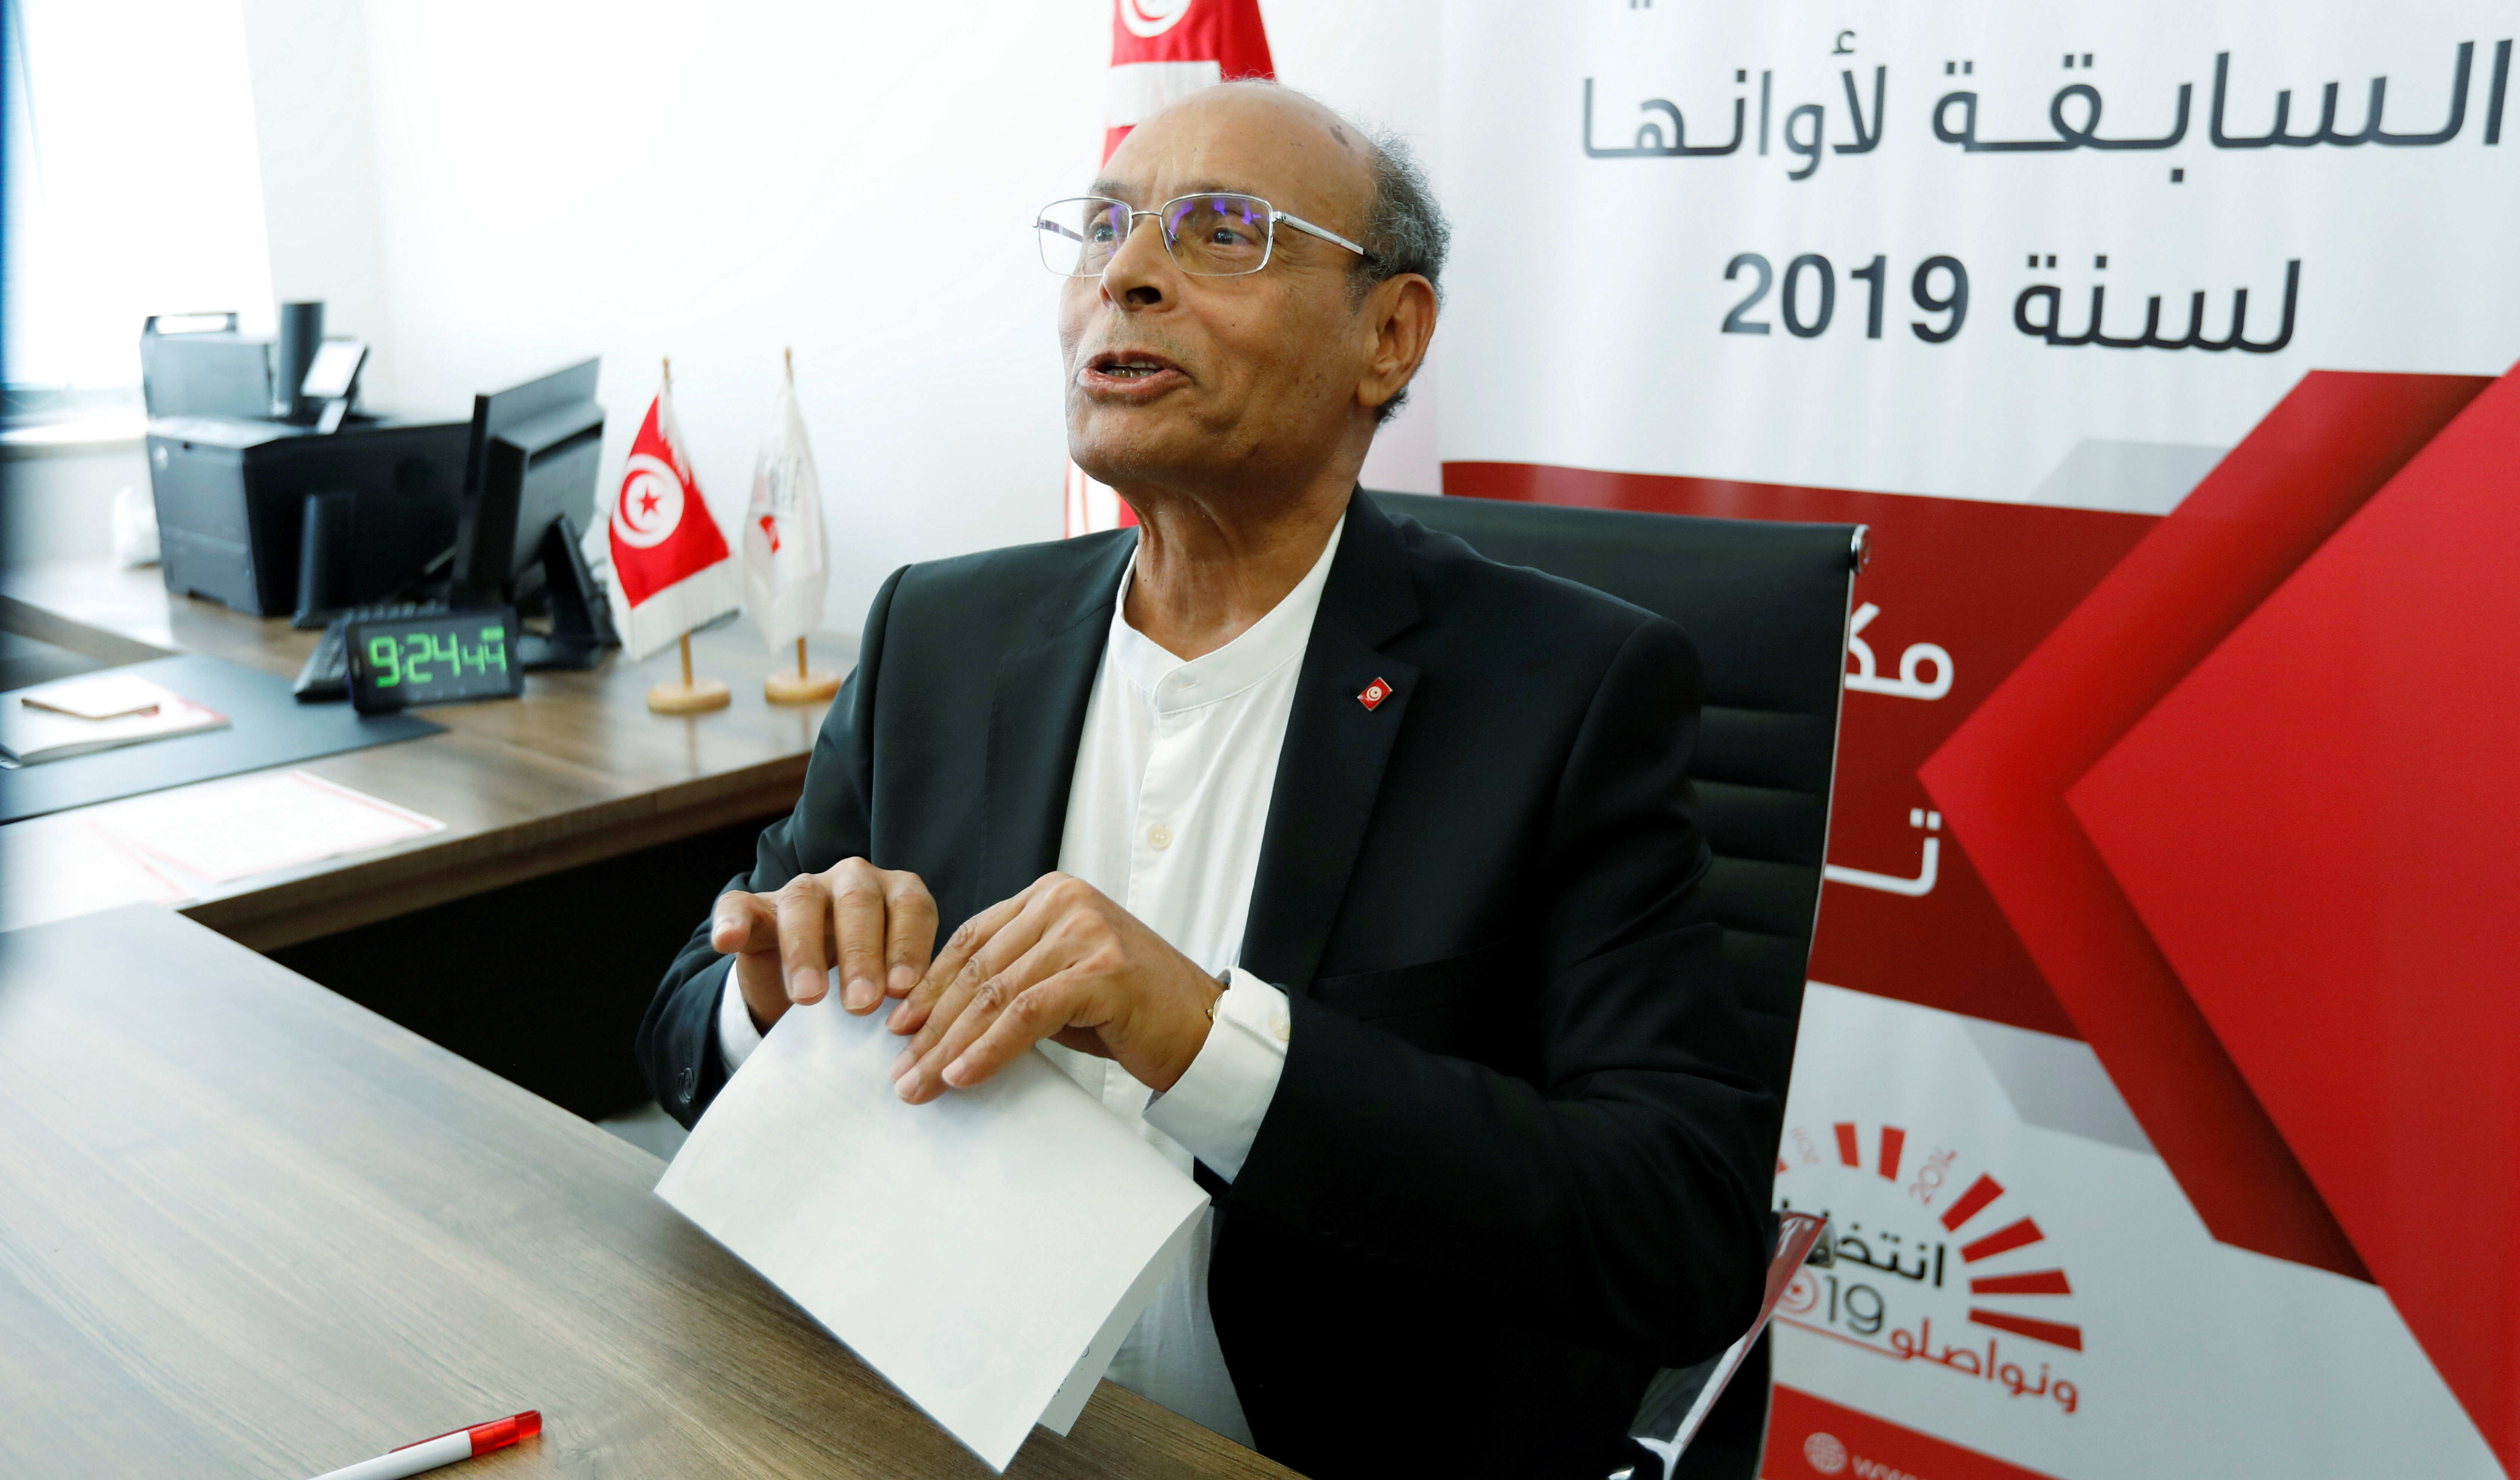 Former Tunisian President Moncef Marzouki submits his candidacy for the presidential election in Tunis